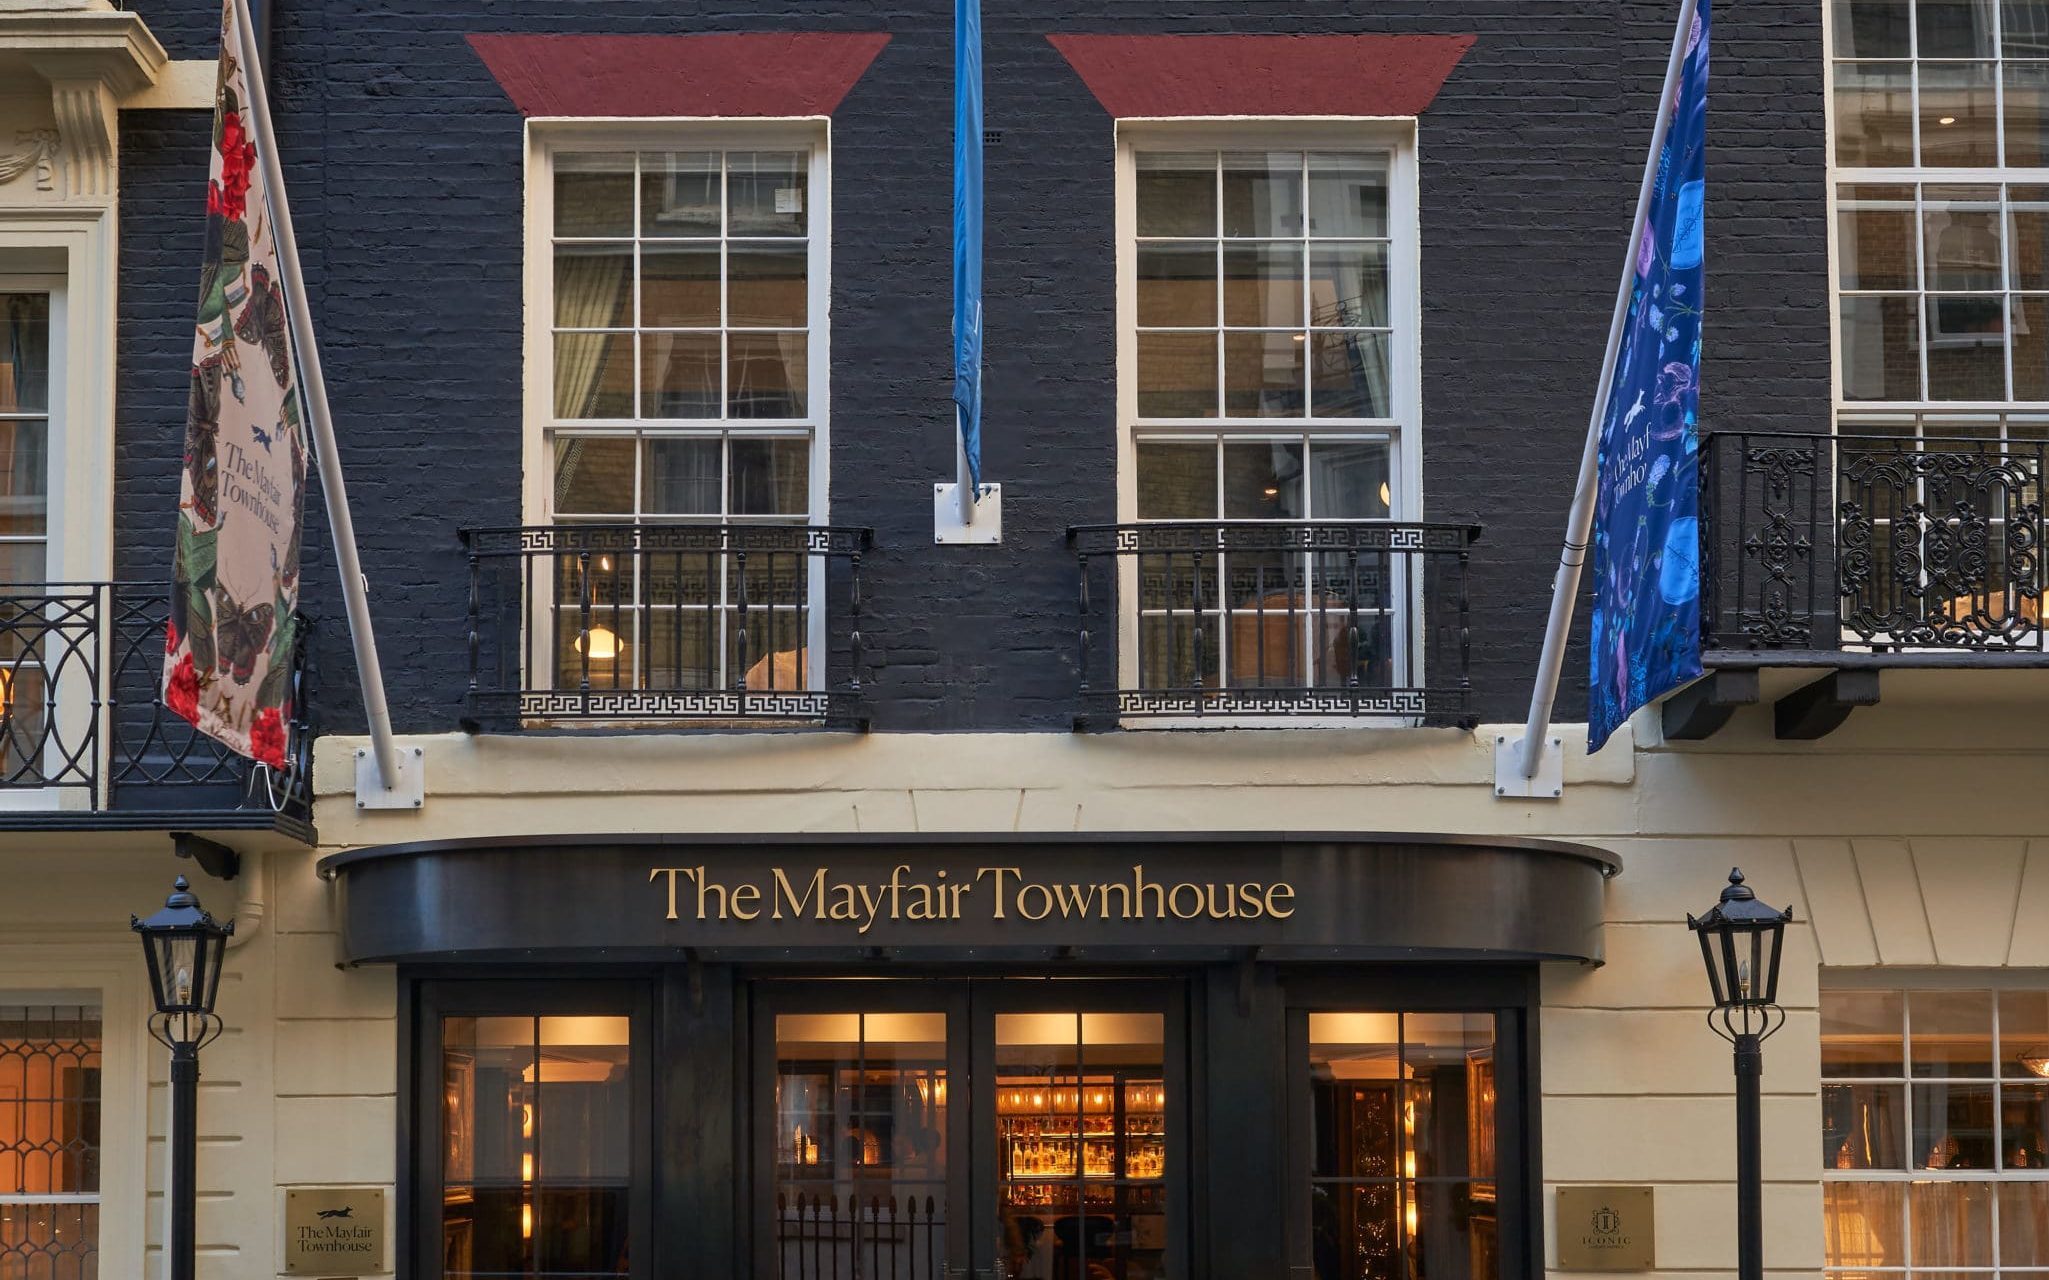 The Mayfair Townhouse: A British-Inspired Boutique Hotel In The Heart of London